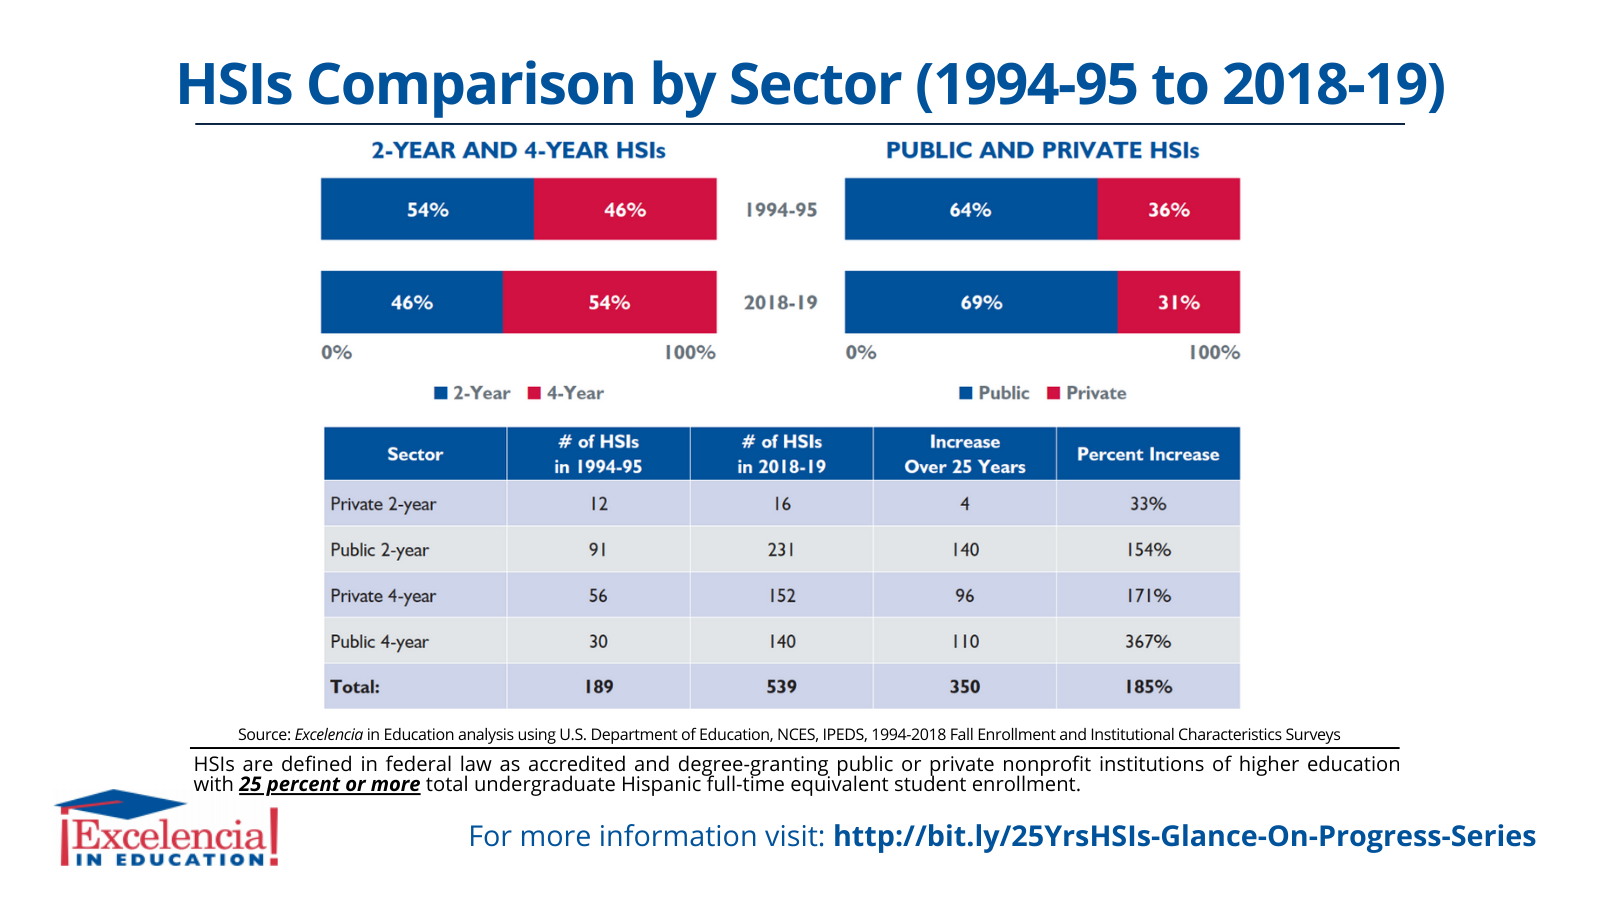 Infographic-HSIs Comparison by Sector 1994-95 to 2018-19